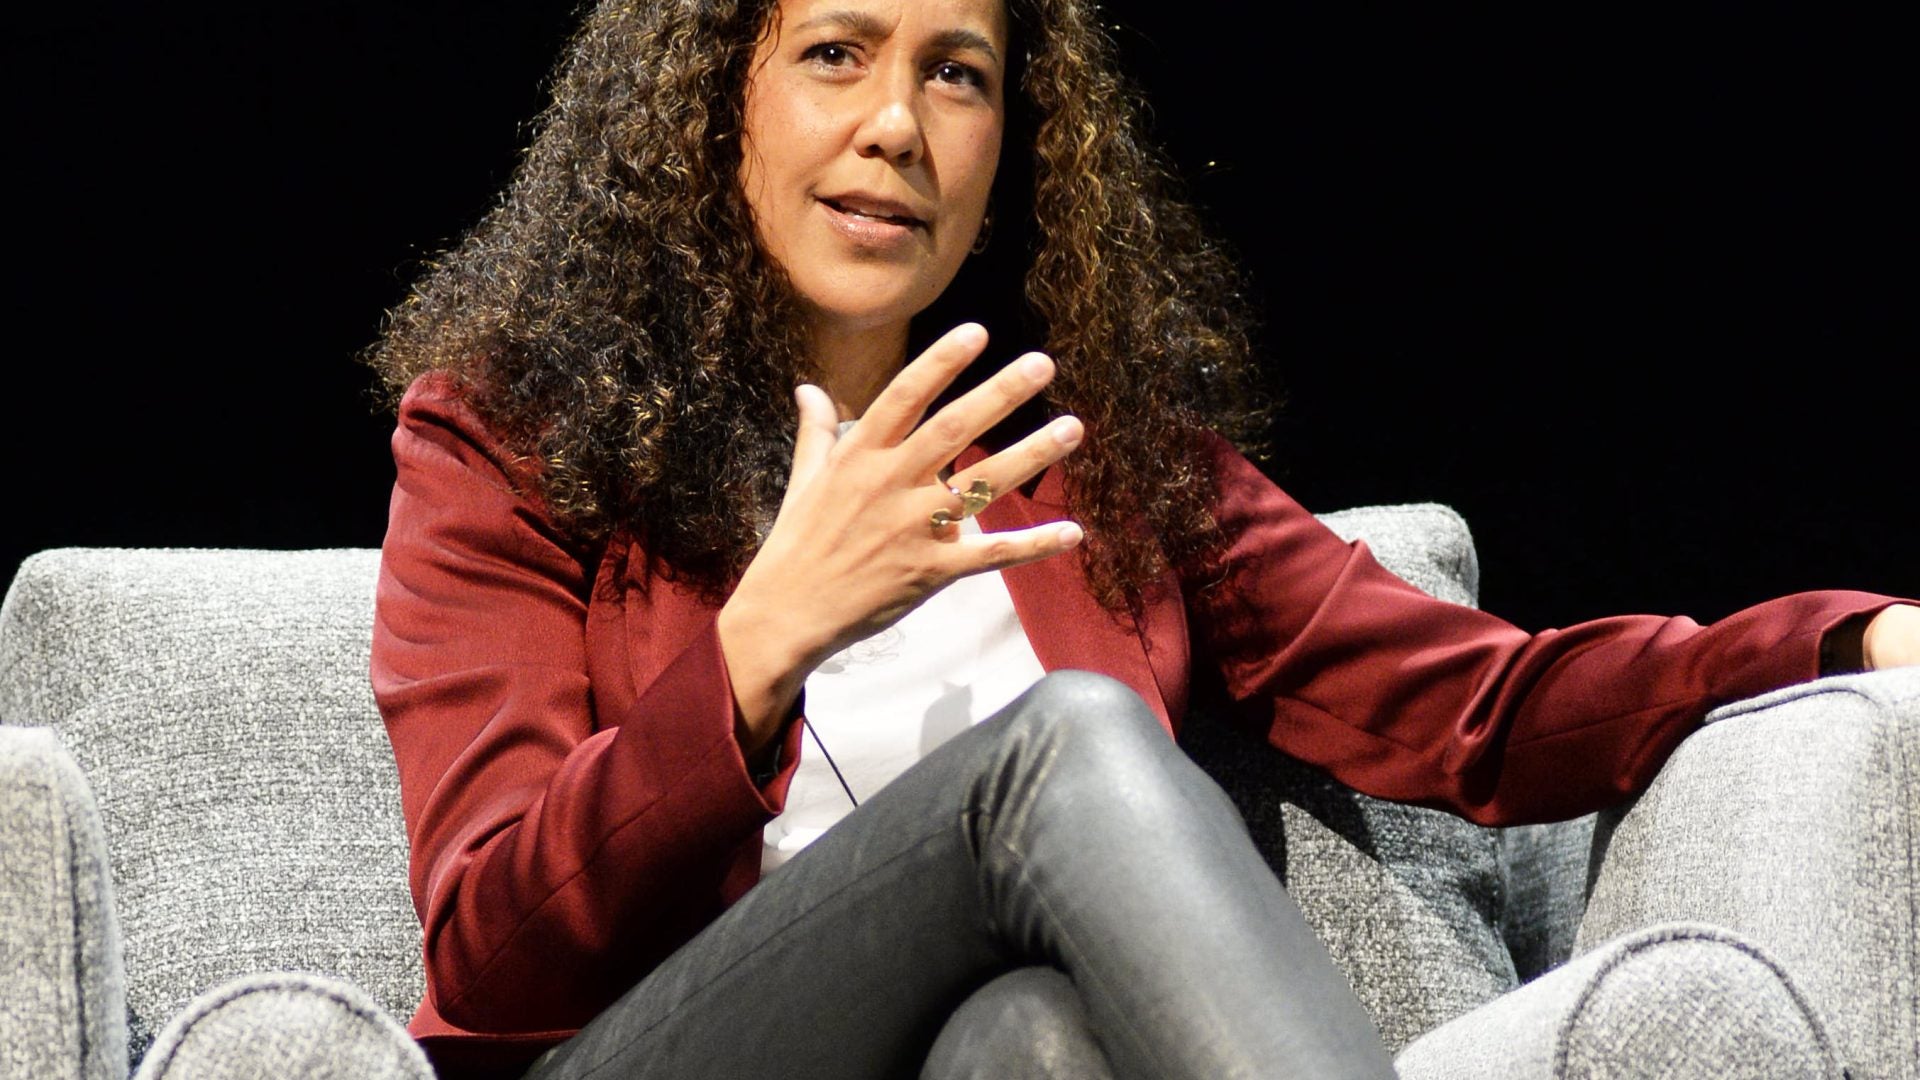 Gina Prince-Bythewood Responds To "Eye-Opening" Snubs For Black Women At The Oscars